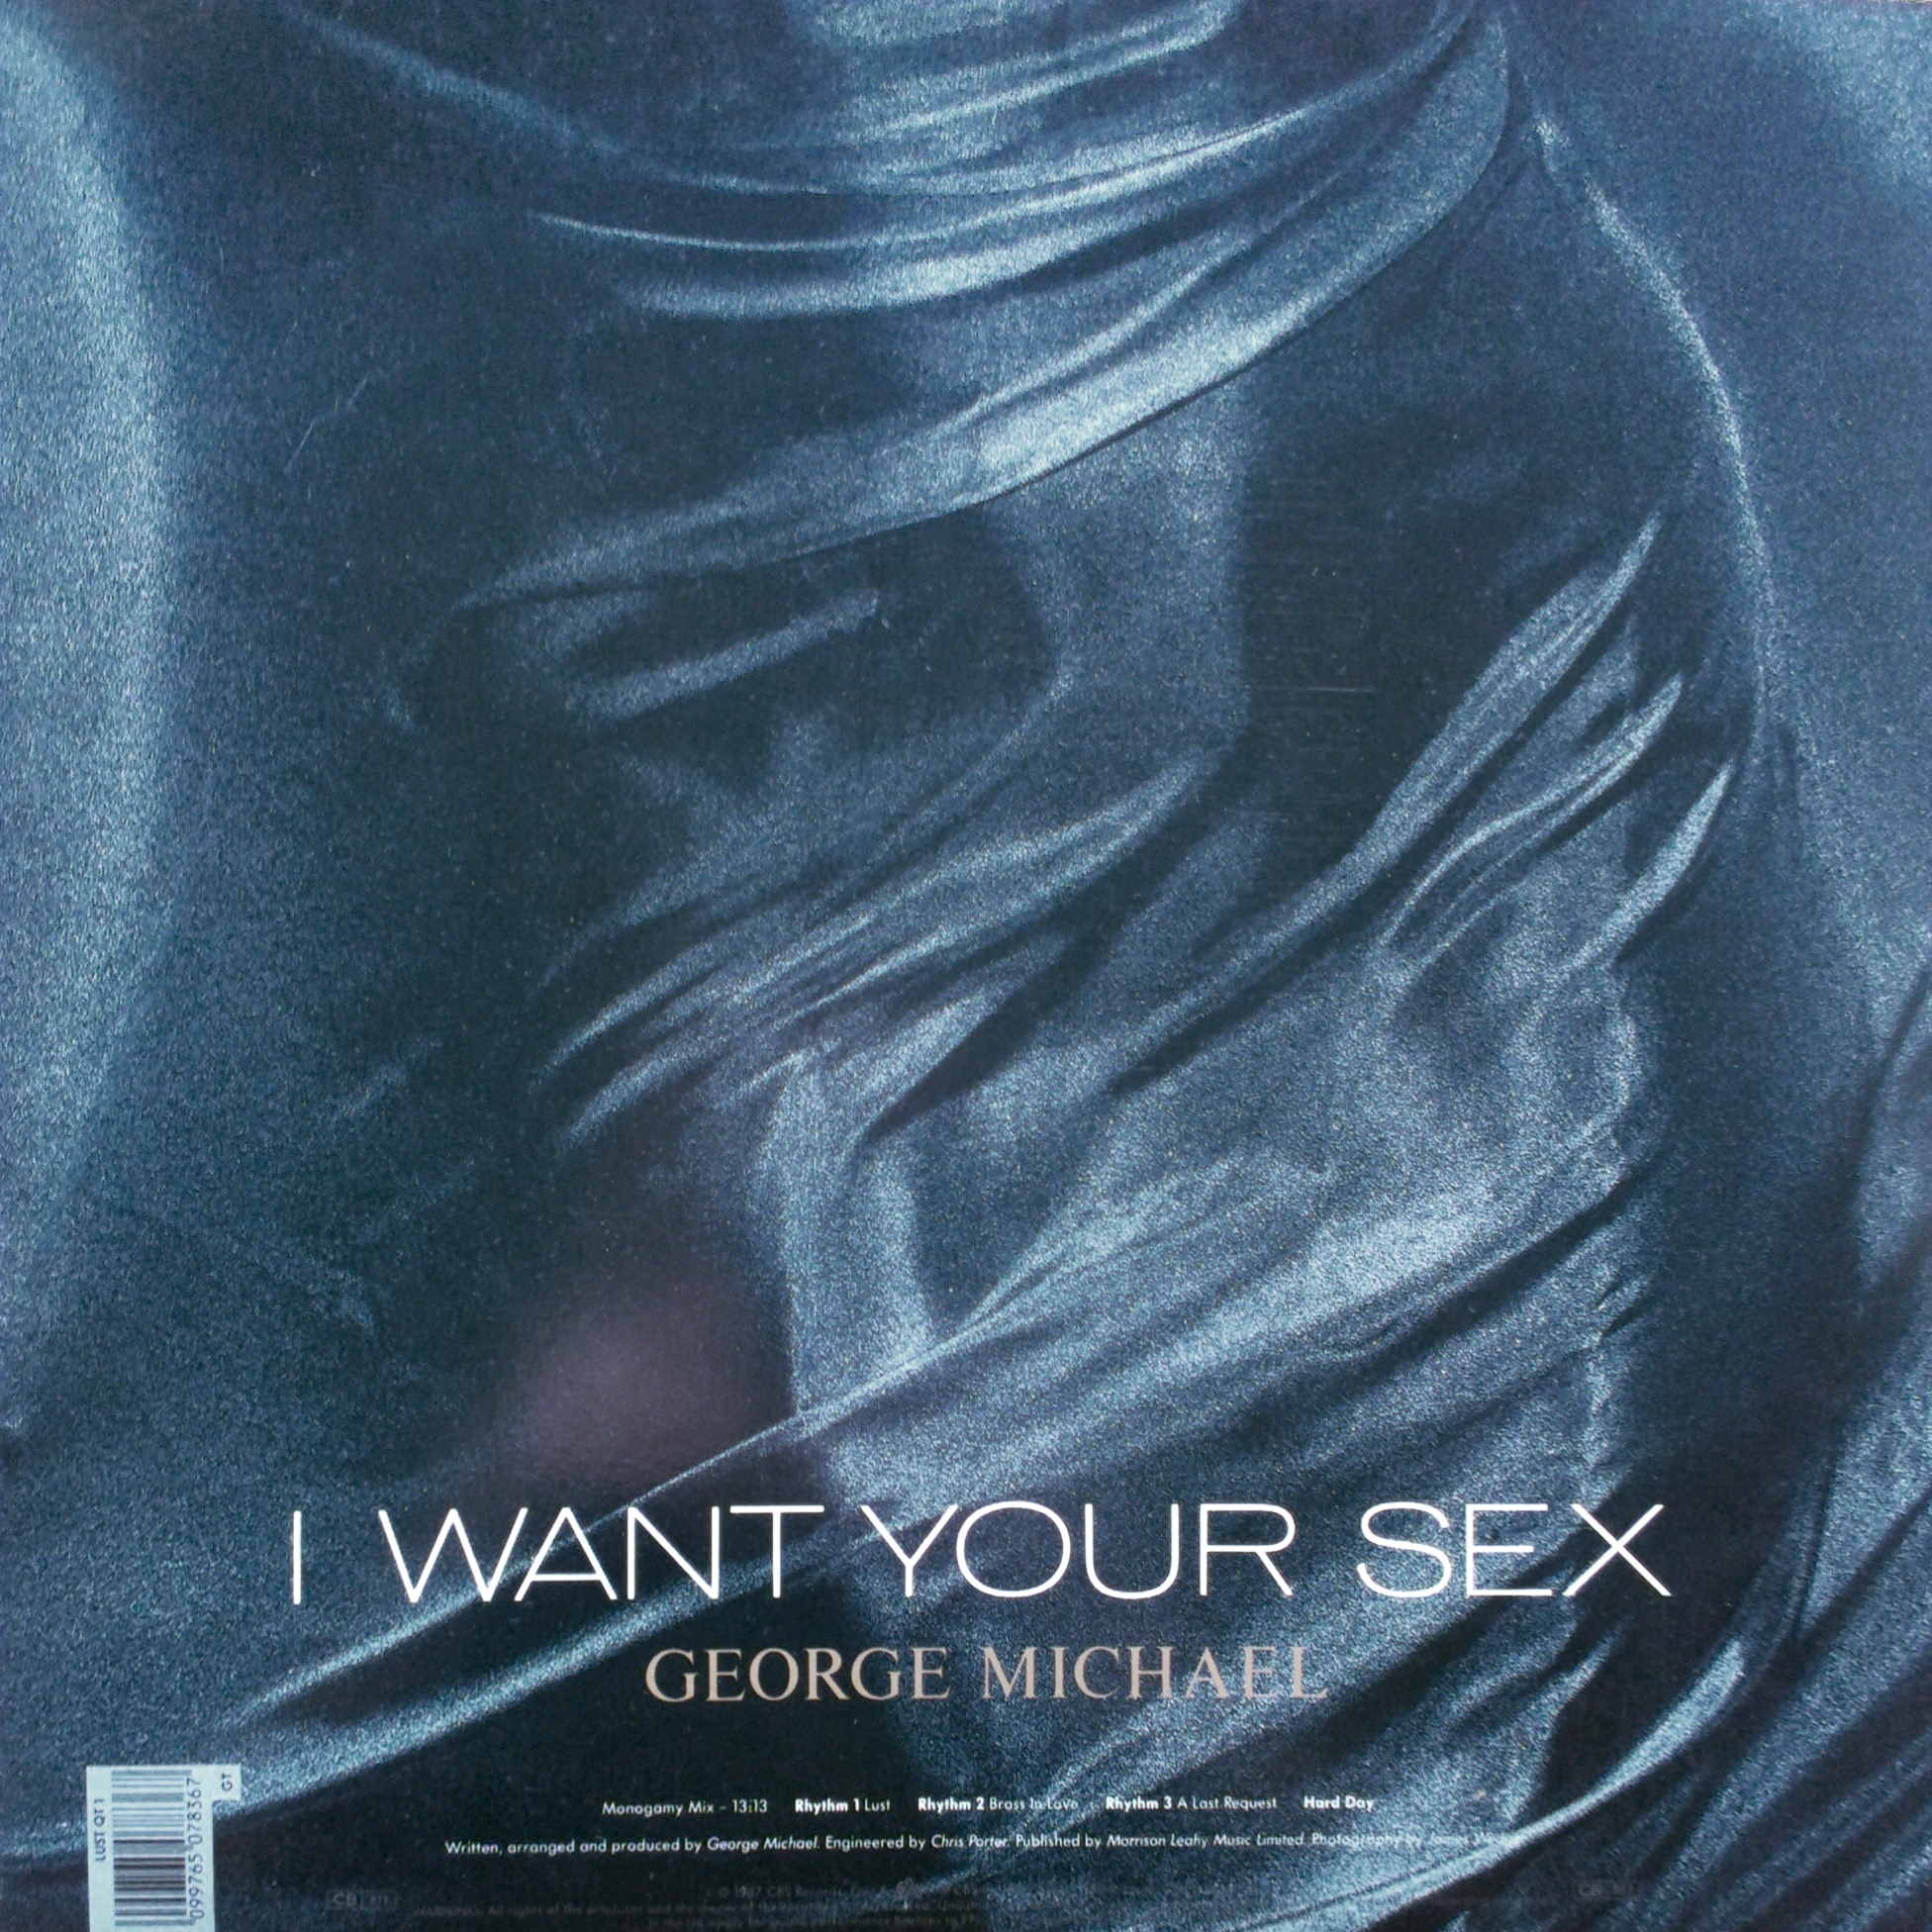 I Want Your Sex Jipsta 7